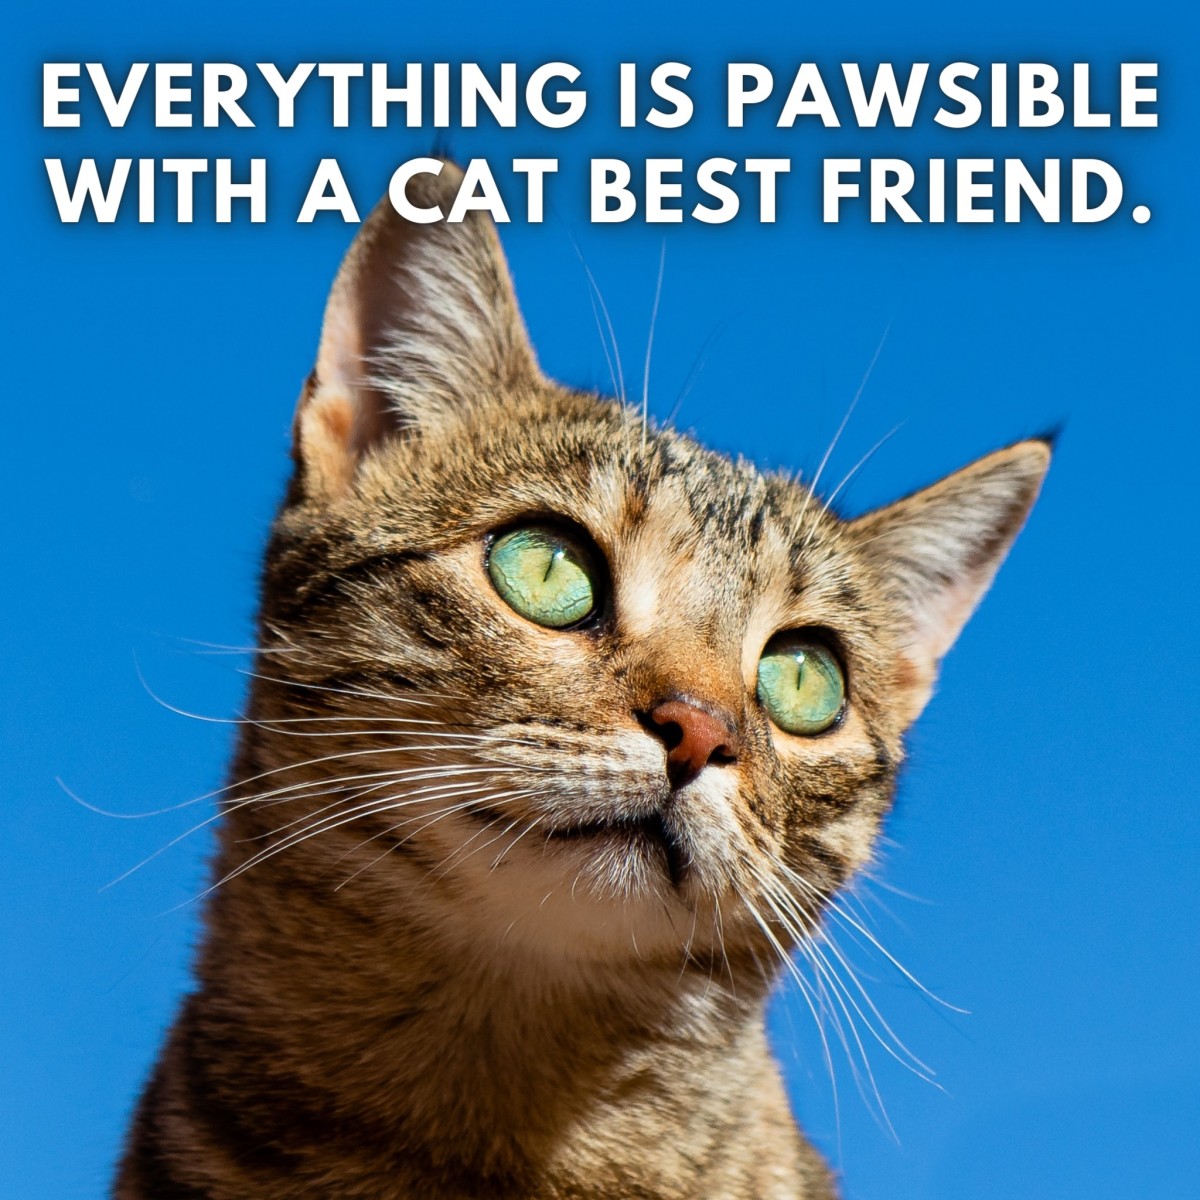 cat-quotes-and-caption-ideas